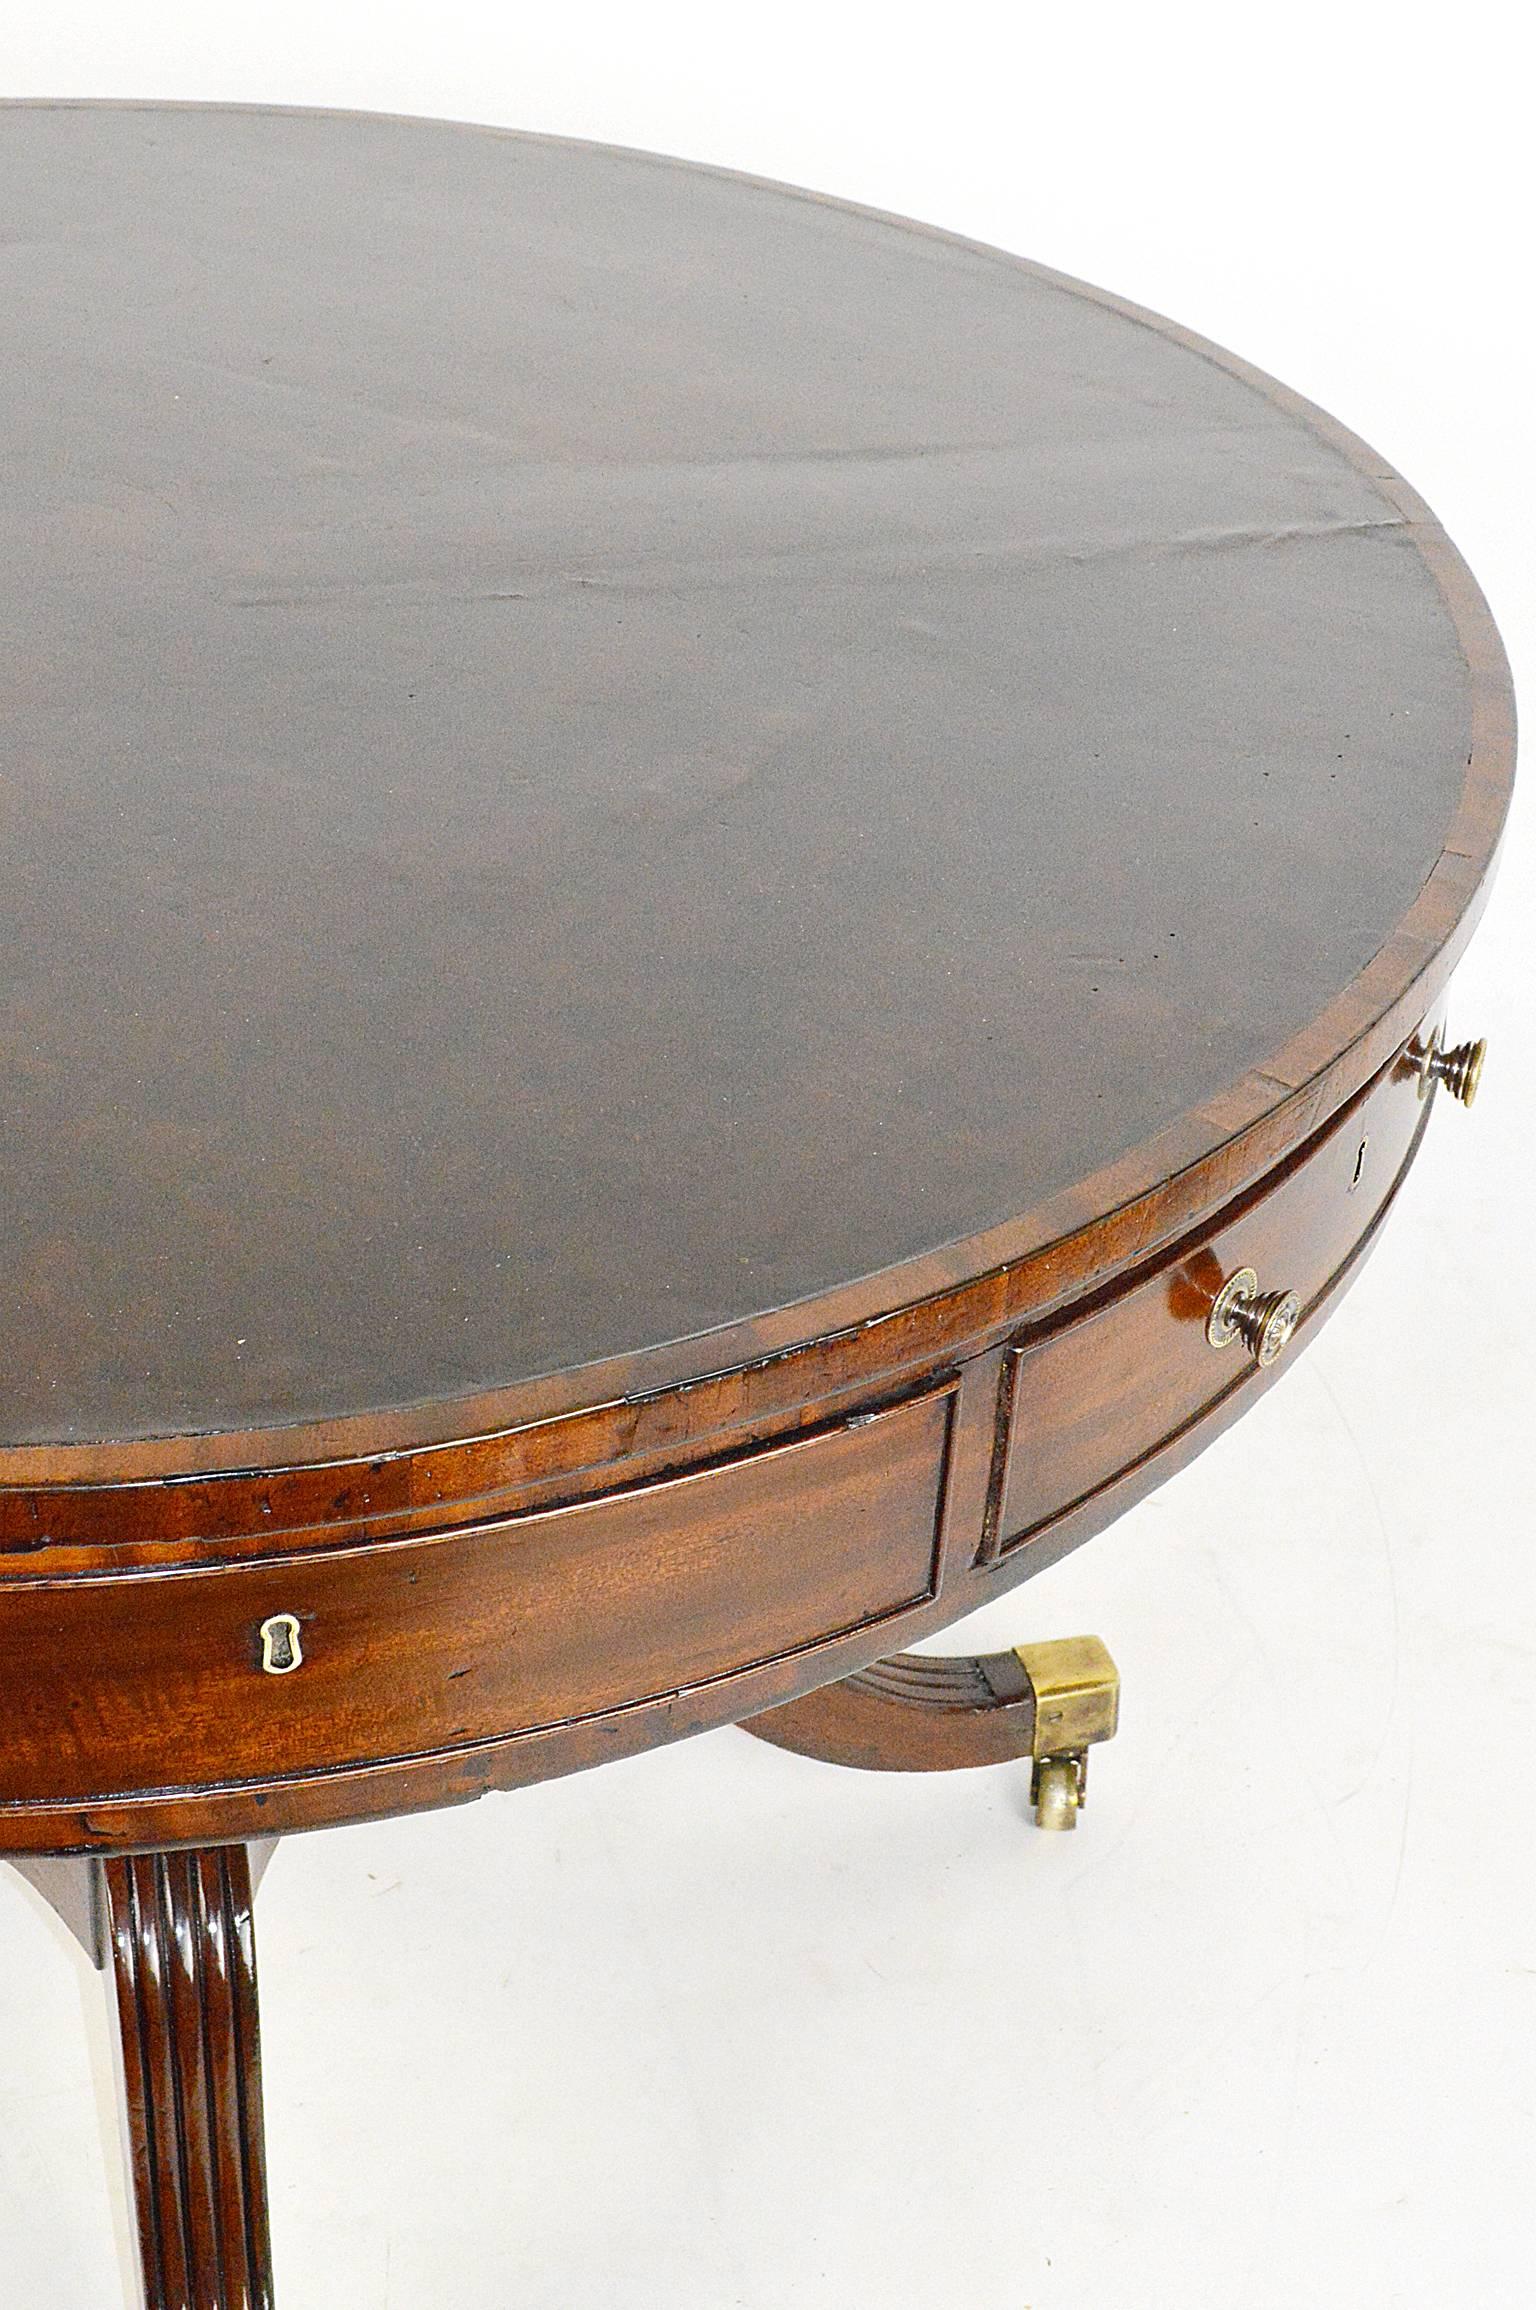 English mahogany inlaid leather top rent/drum table top sitting on four column pedestal terminating on saber legs resting on original brass casters. Late 18th or early 19th century.